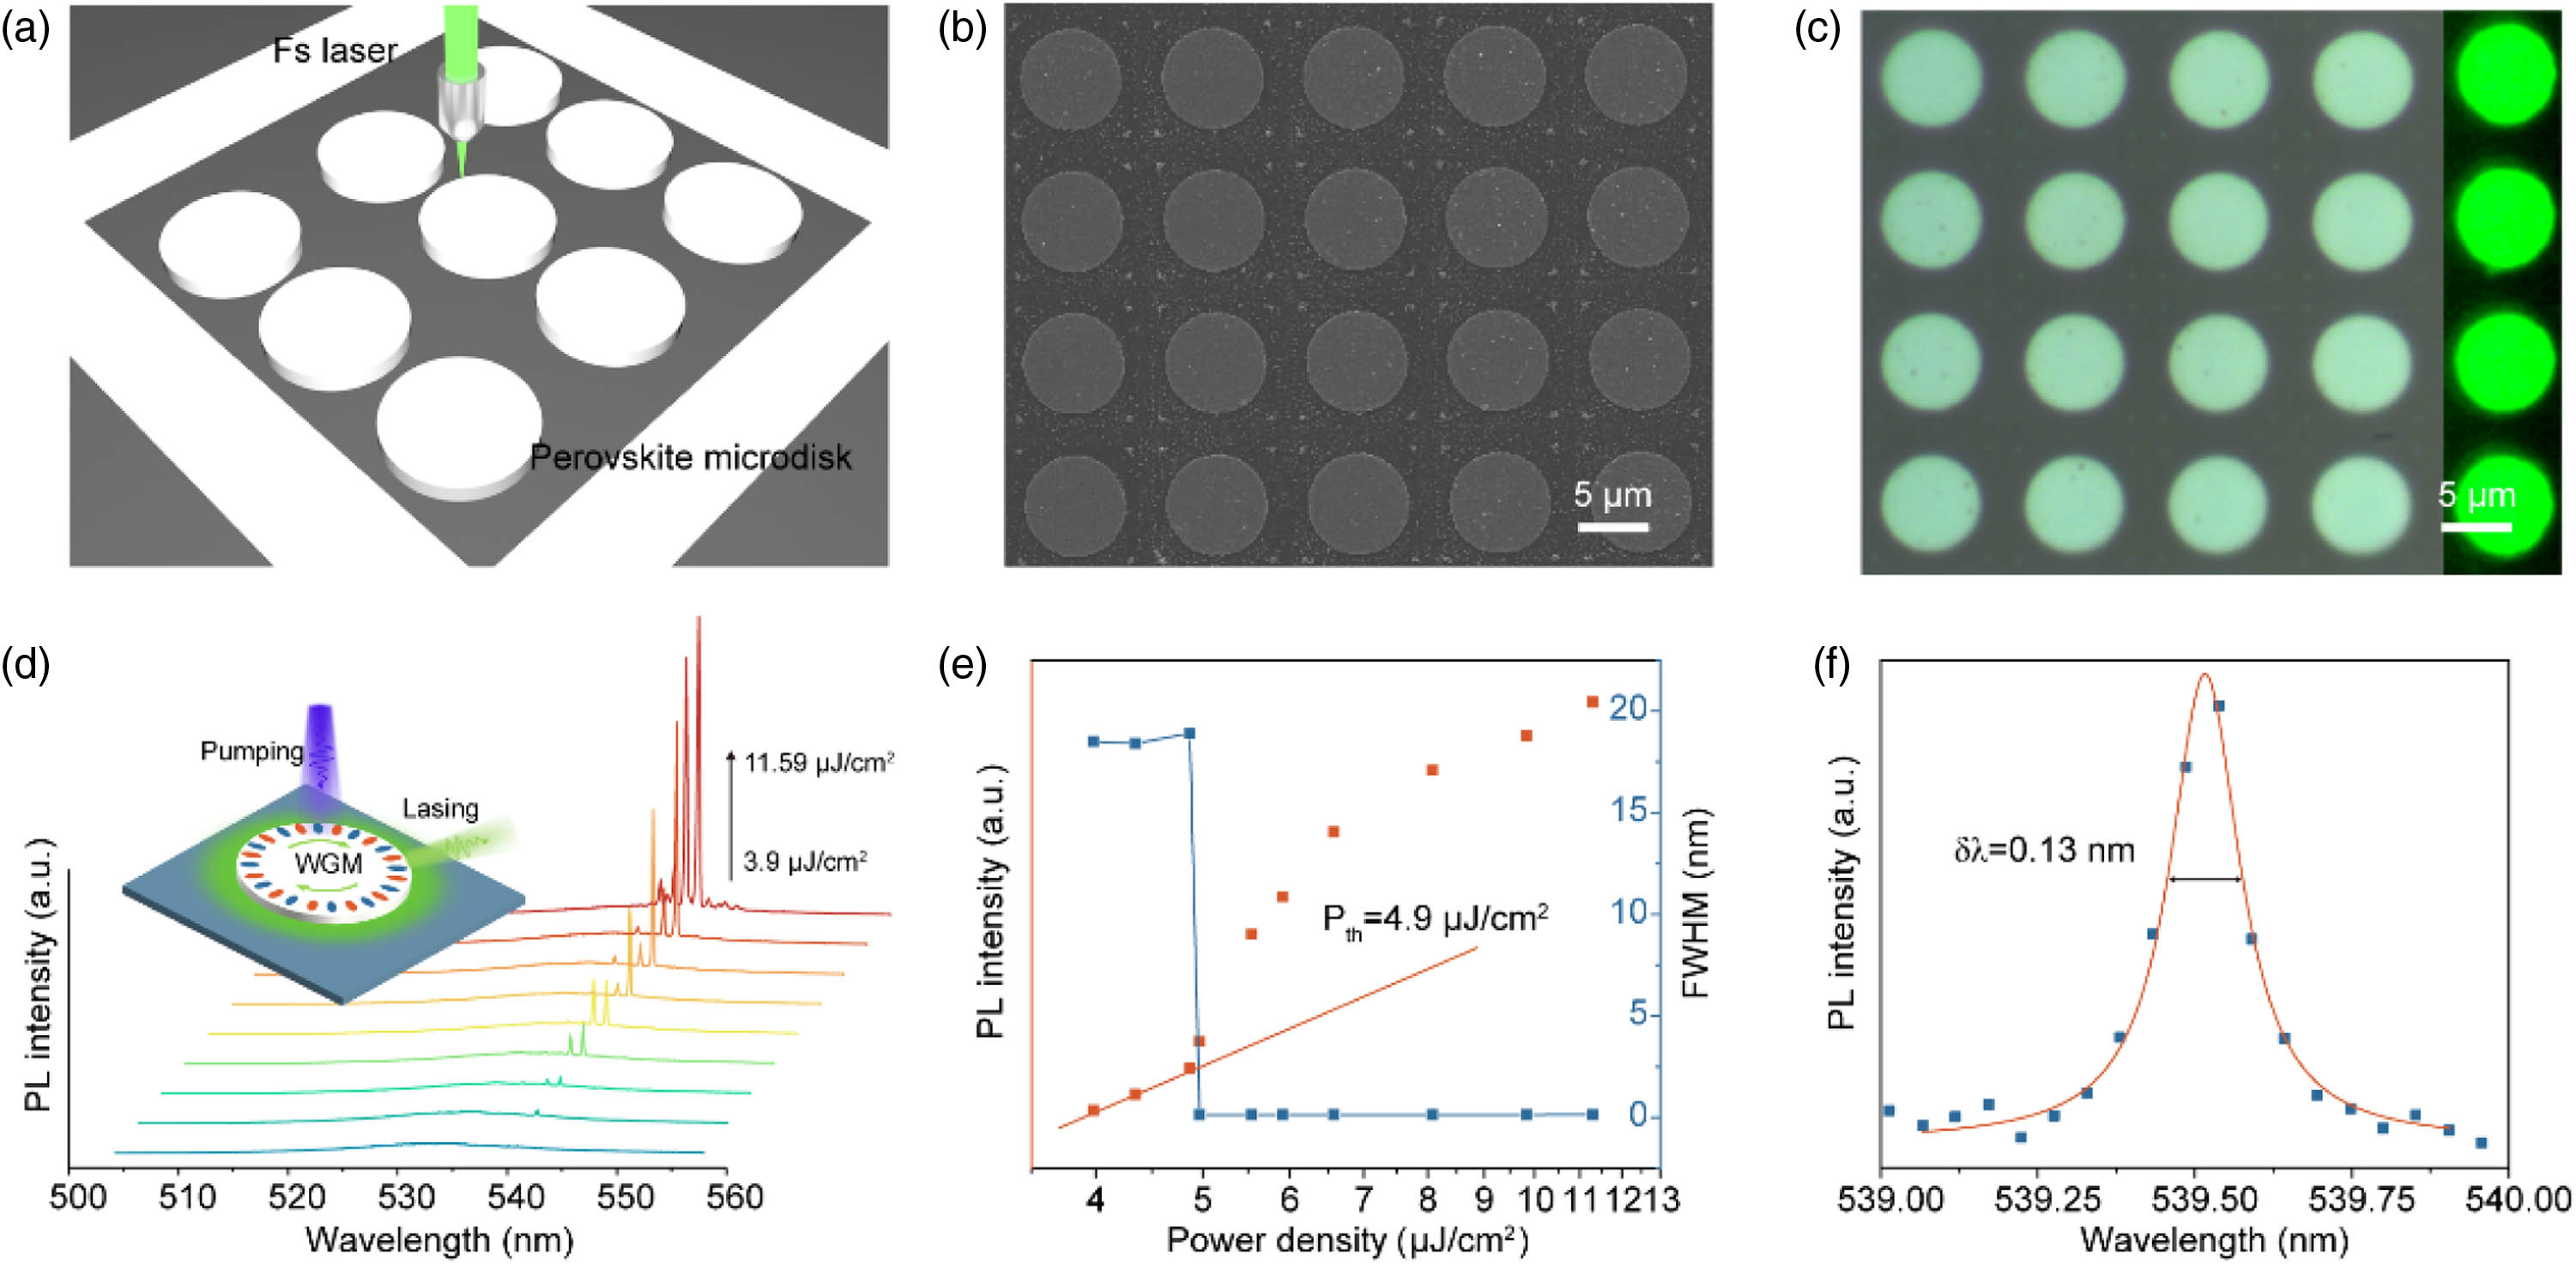 Characterizations and lasing action of the perovskite microdisk array fabricated using a fs laser. (a) Schematic representation of the fabrication processes for a circular microdisk array. (b) SEM image of perovskite microdisks with a diameter of 7 μm. (c) Optical image of the obtained perovskite circular microdisks. Right inset: PL images of perovskite circular microdisks. (d) Excitation power-dependent PL spectra from an individual perovskite microdisk laser. Top inset: schematic of an individual perovskite microdisk laser pumped by a 400 nm laser excitation (∼40 fs, 10 kHz). (e) Dependence of the PL peak intensity and FWHM on the pump density, indicating the evolution from random spontaneous emission to stimulated emission and the lasing threshold at ∼4.9 μJ/cm2. (f) Lorentzian fitting of a lasing mode. The FWHM of the lasing peak δλ is 0.13 nm, corresponding to a Q factor of ∼4150.